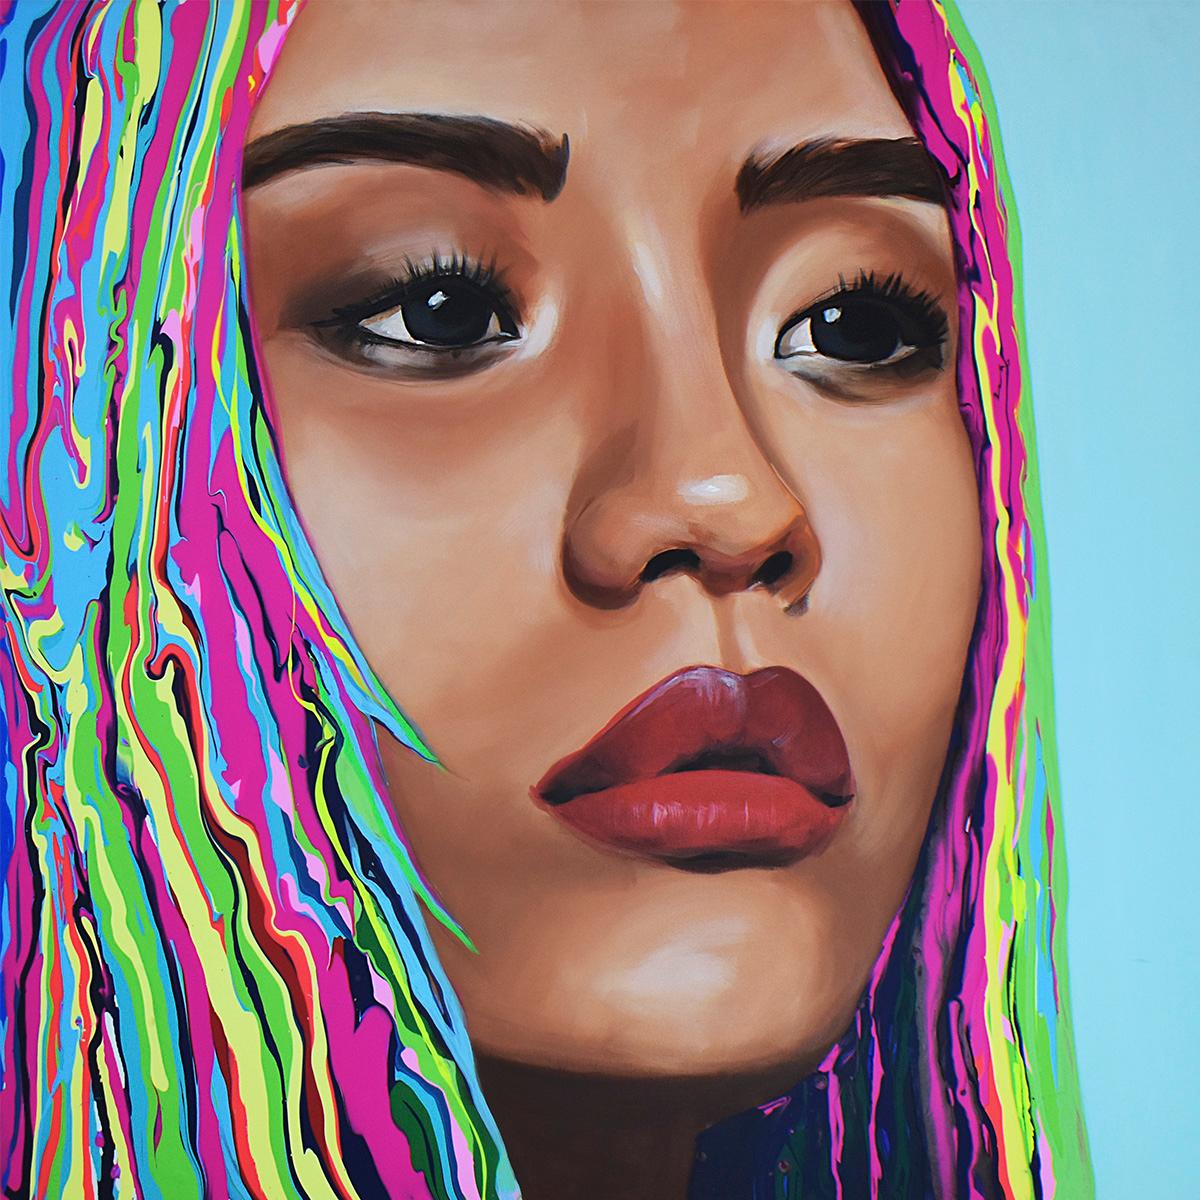 Yeliza is a Berlin based artist with a contemporary vision of Pop Art. Her paintings are not only filled with the typical Pop Art colors, but also portrait how our culture is changing and how we are redefining the values of our contemporary society.